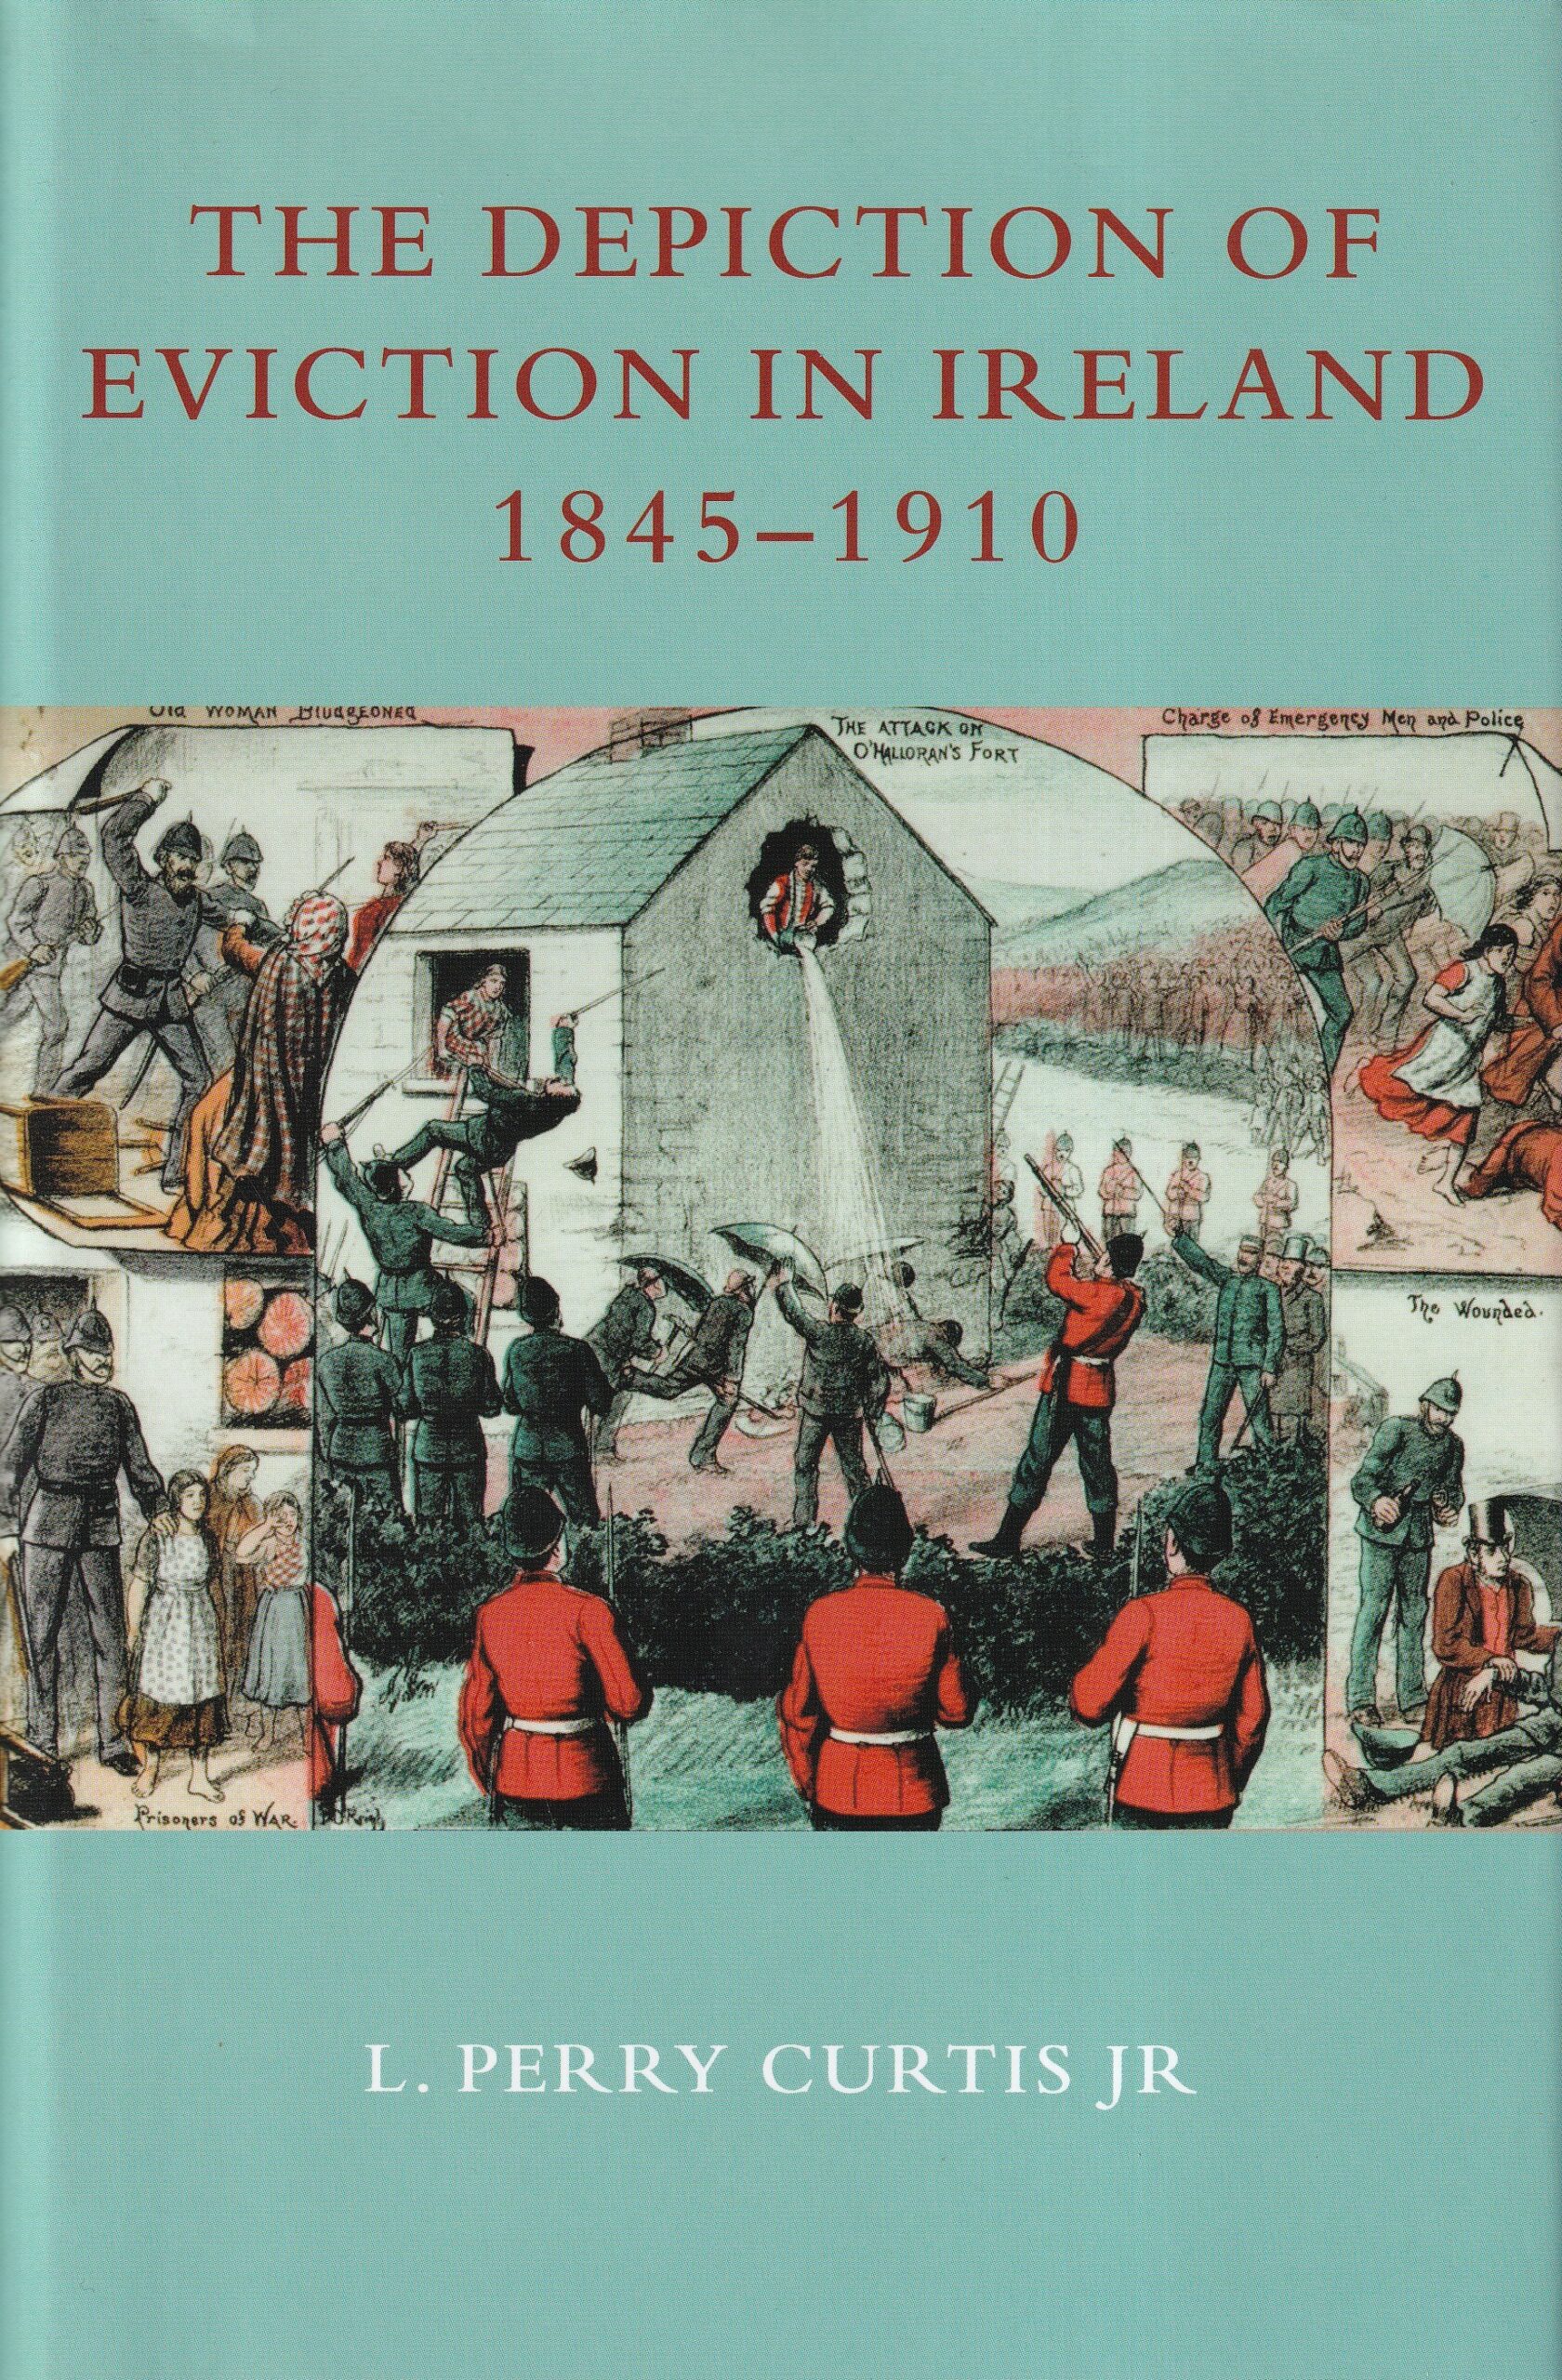 The Depiction of Eviction in Ireland 1845-1910 | L. Perry Curtis Jr | Charlie Byrne's